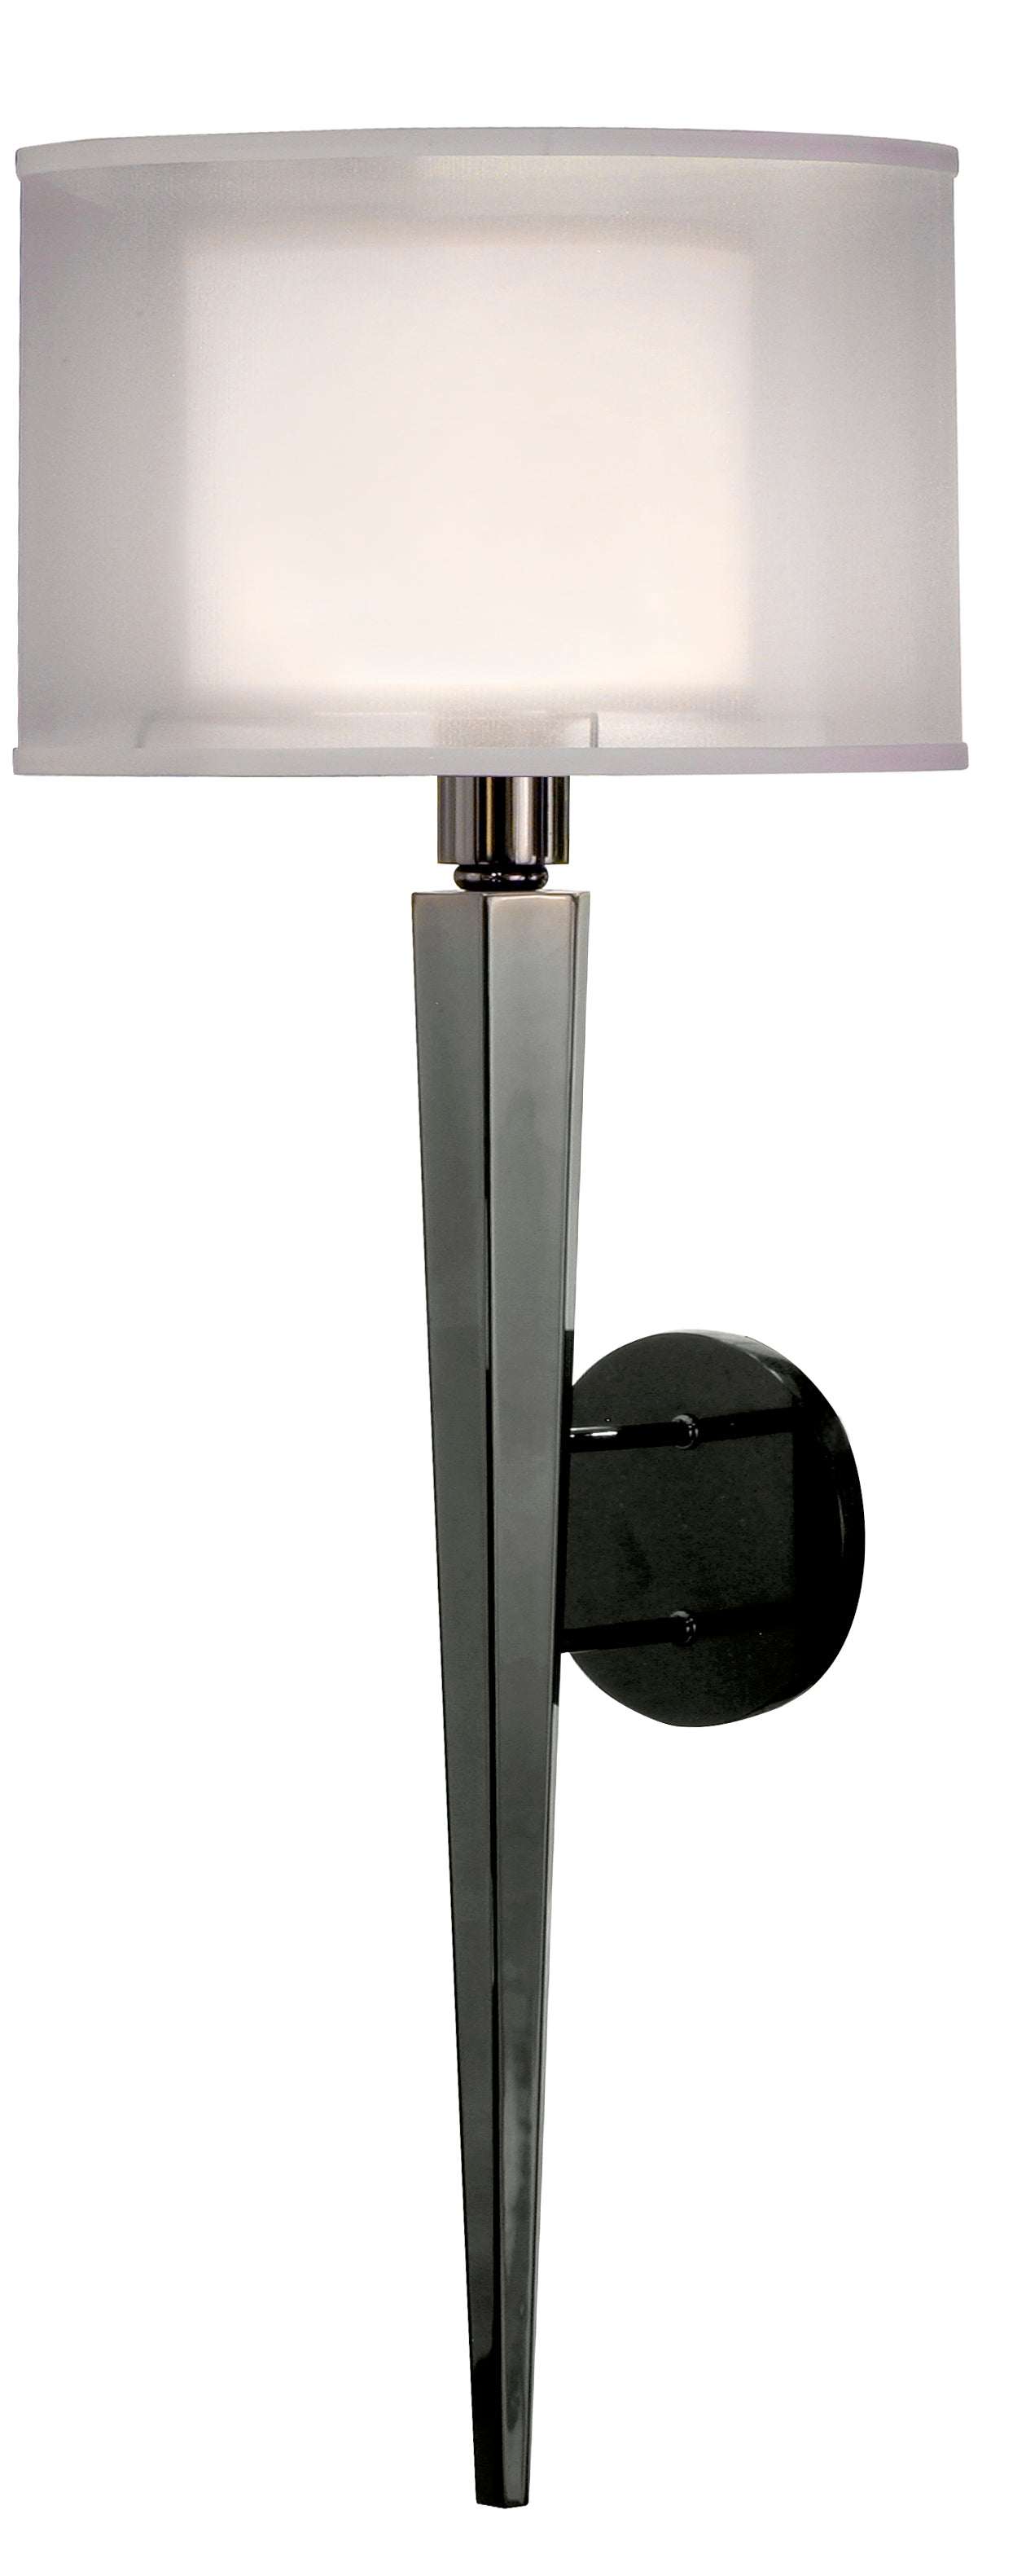 Thumprints Obsidian Wall Sconce 1097-ASL-2105